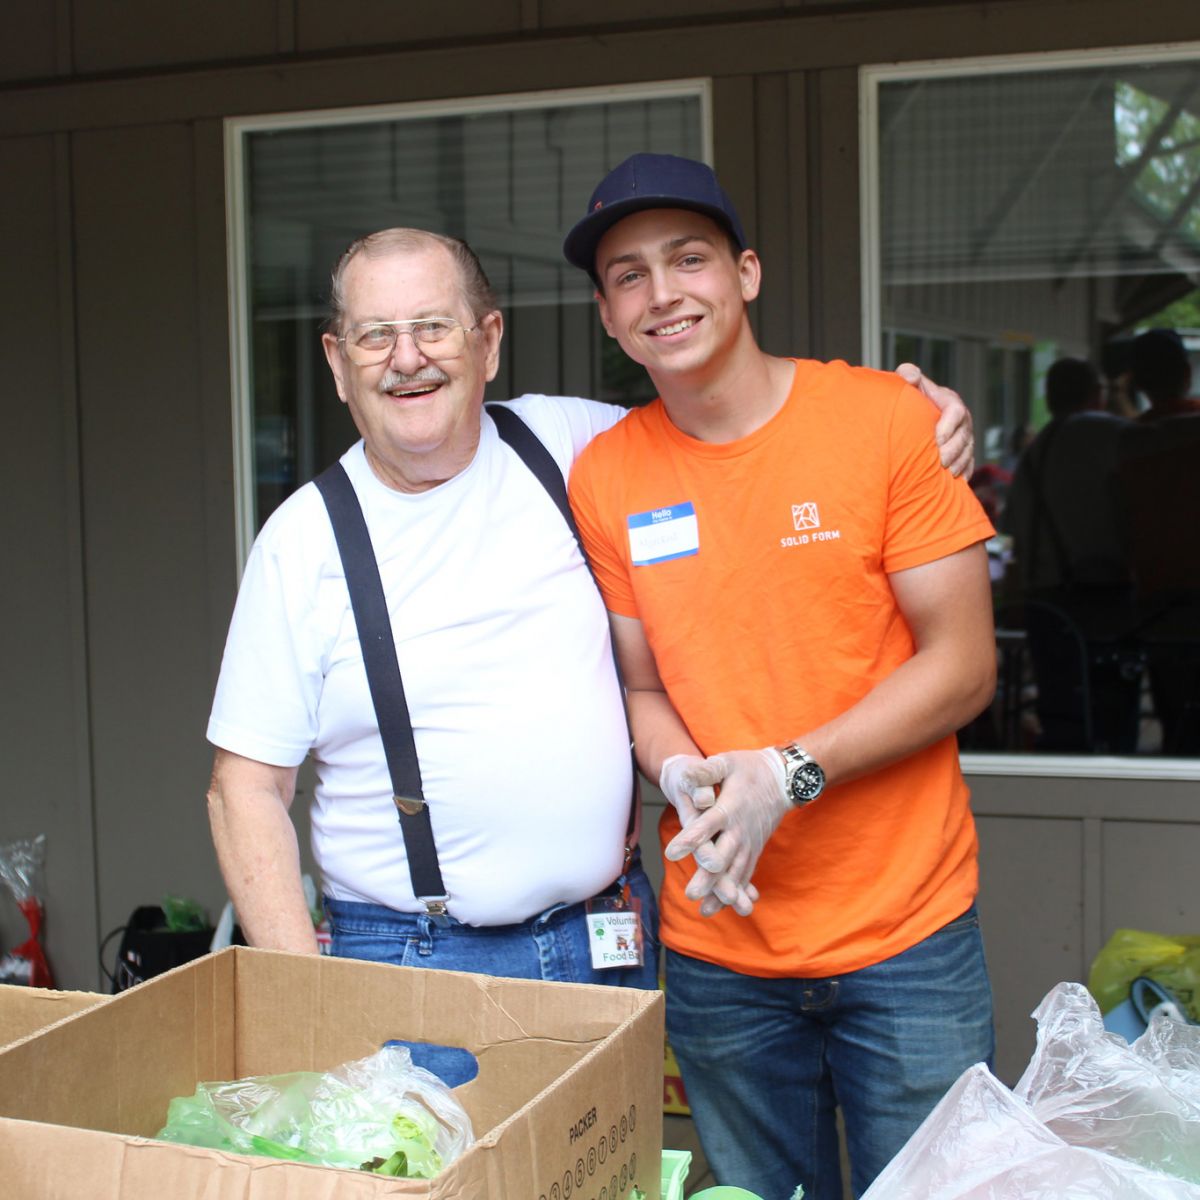 Marckus Smith, intern at Solid Form, stands with another volunteer at Harvest2Home